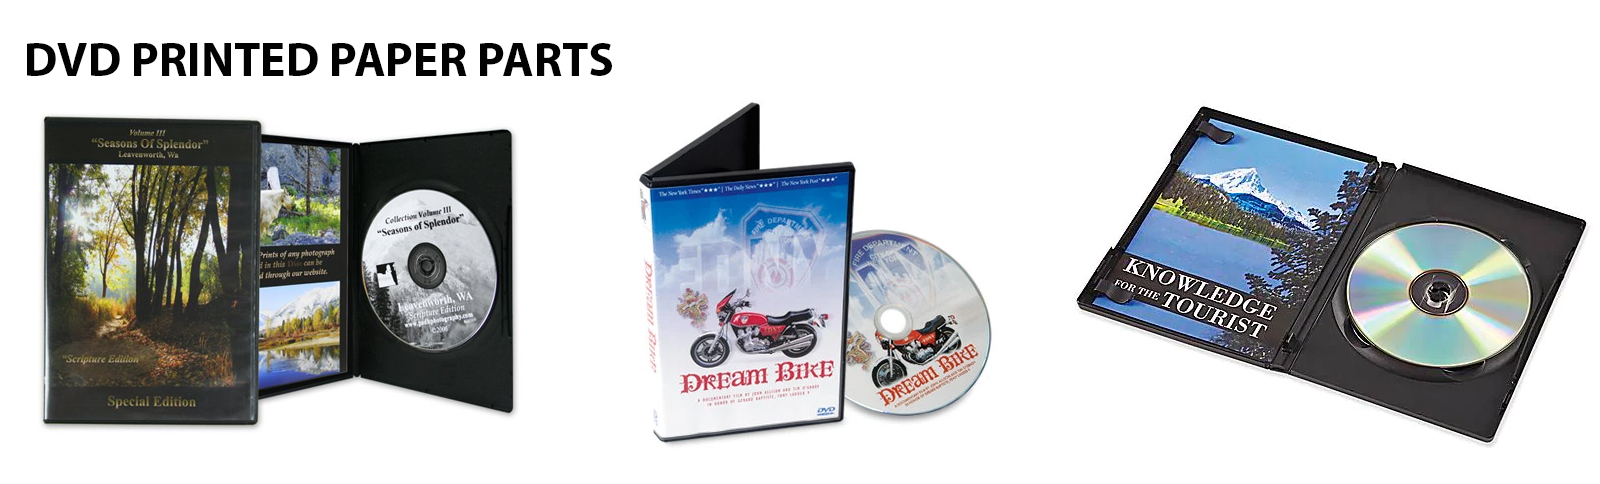 DVDs in Black or Clear Cases in Oxfordshire UK